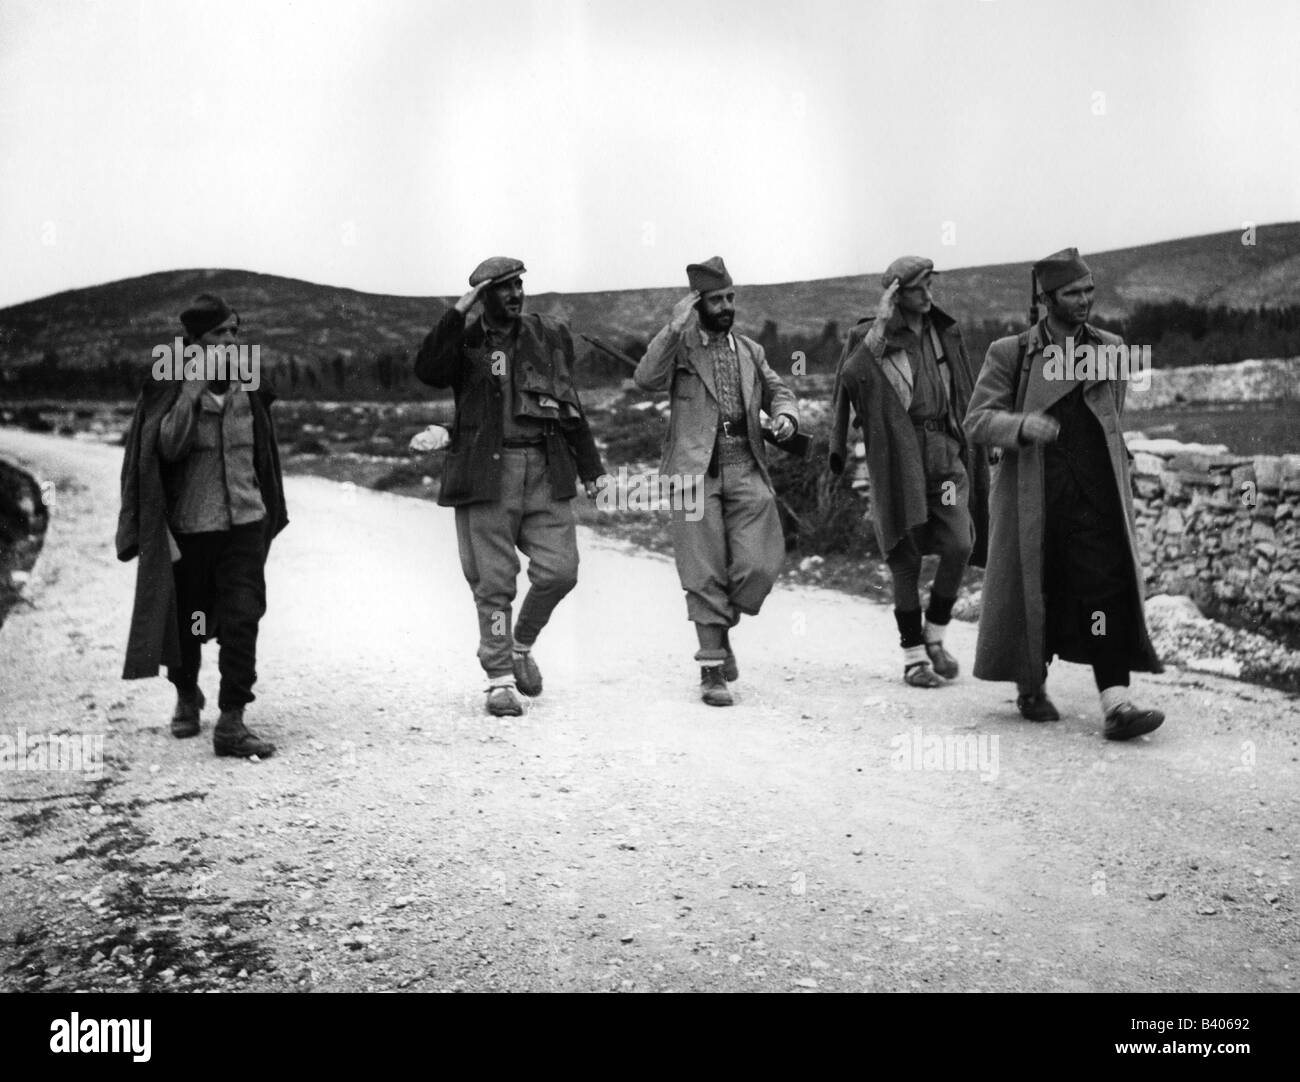 events, Second World War / WWII, Yugoslavia, armed troop, probably Serbian partisans, partisan warfare, resistance, 20th century, historic, historical, Balkans, Serbia, Serbs, saluting, people, 1940s, Stock Photo